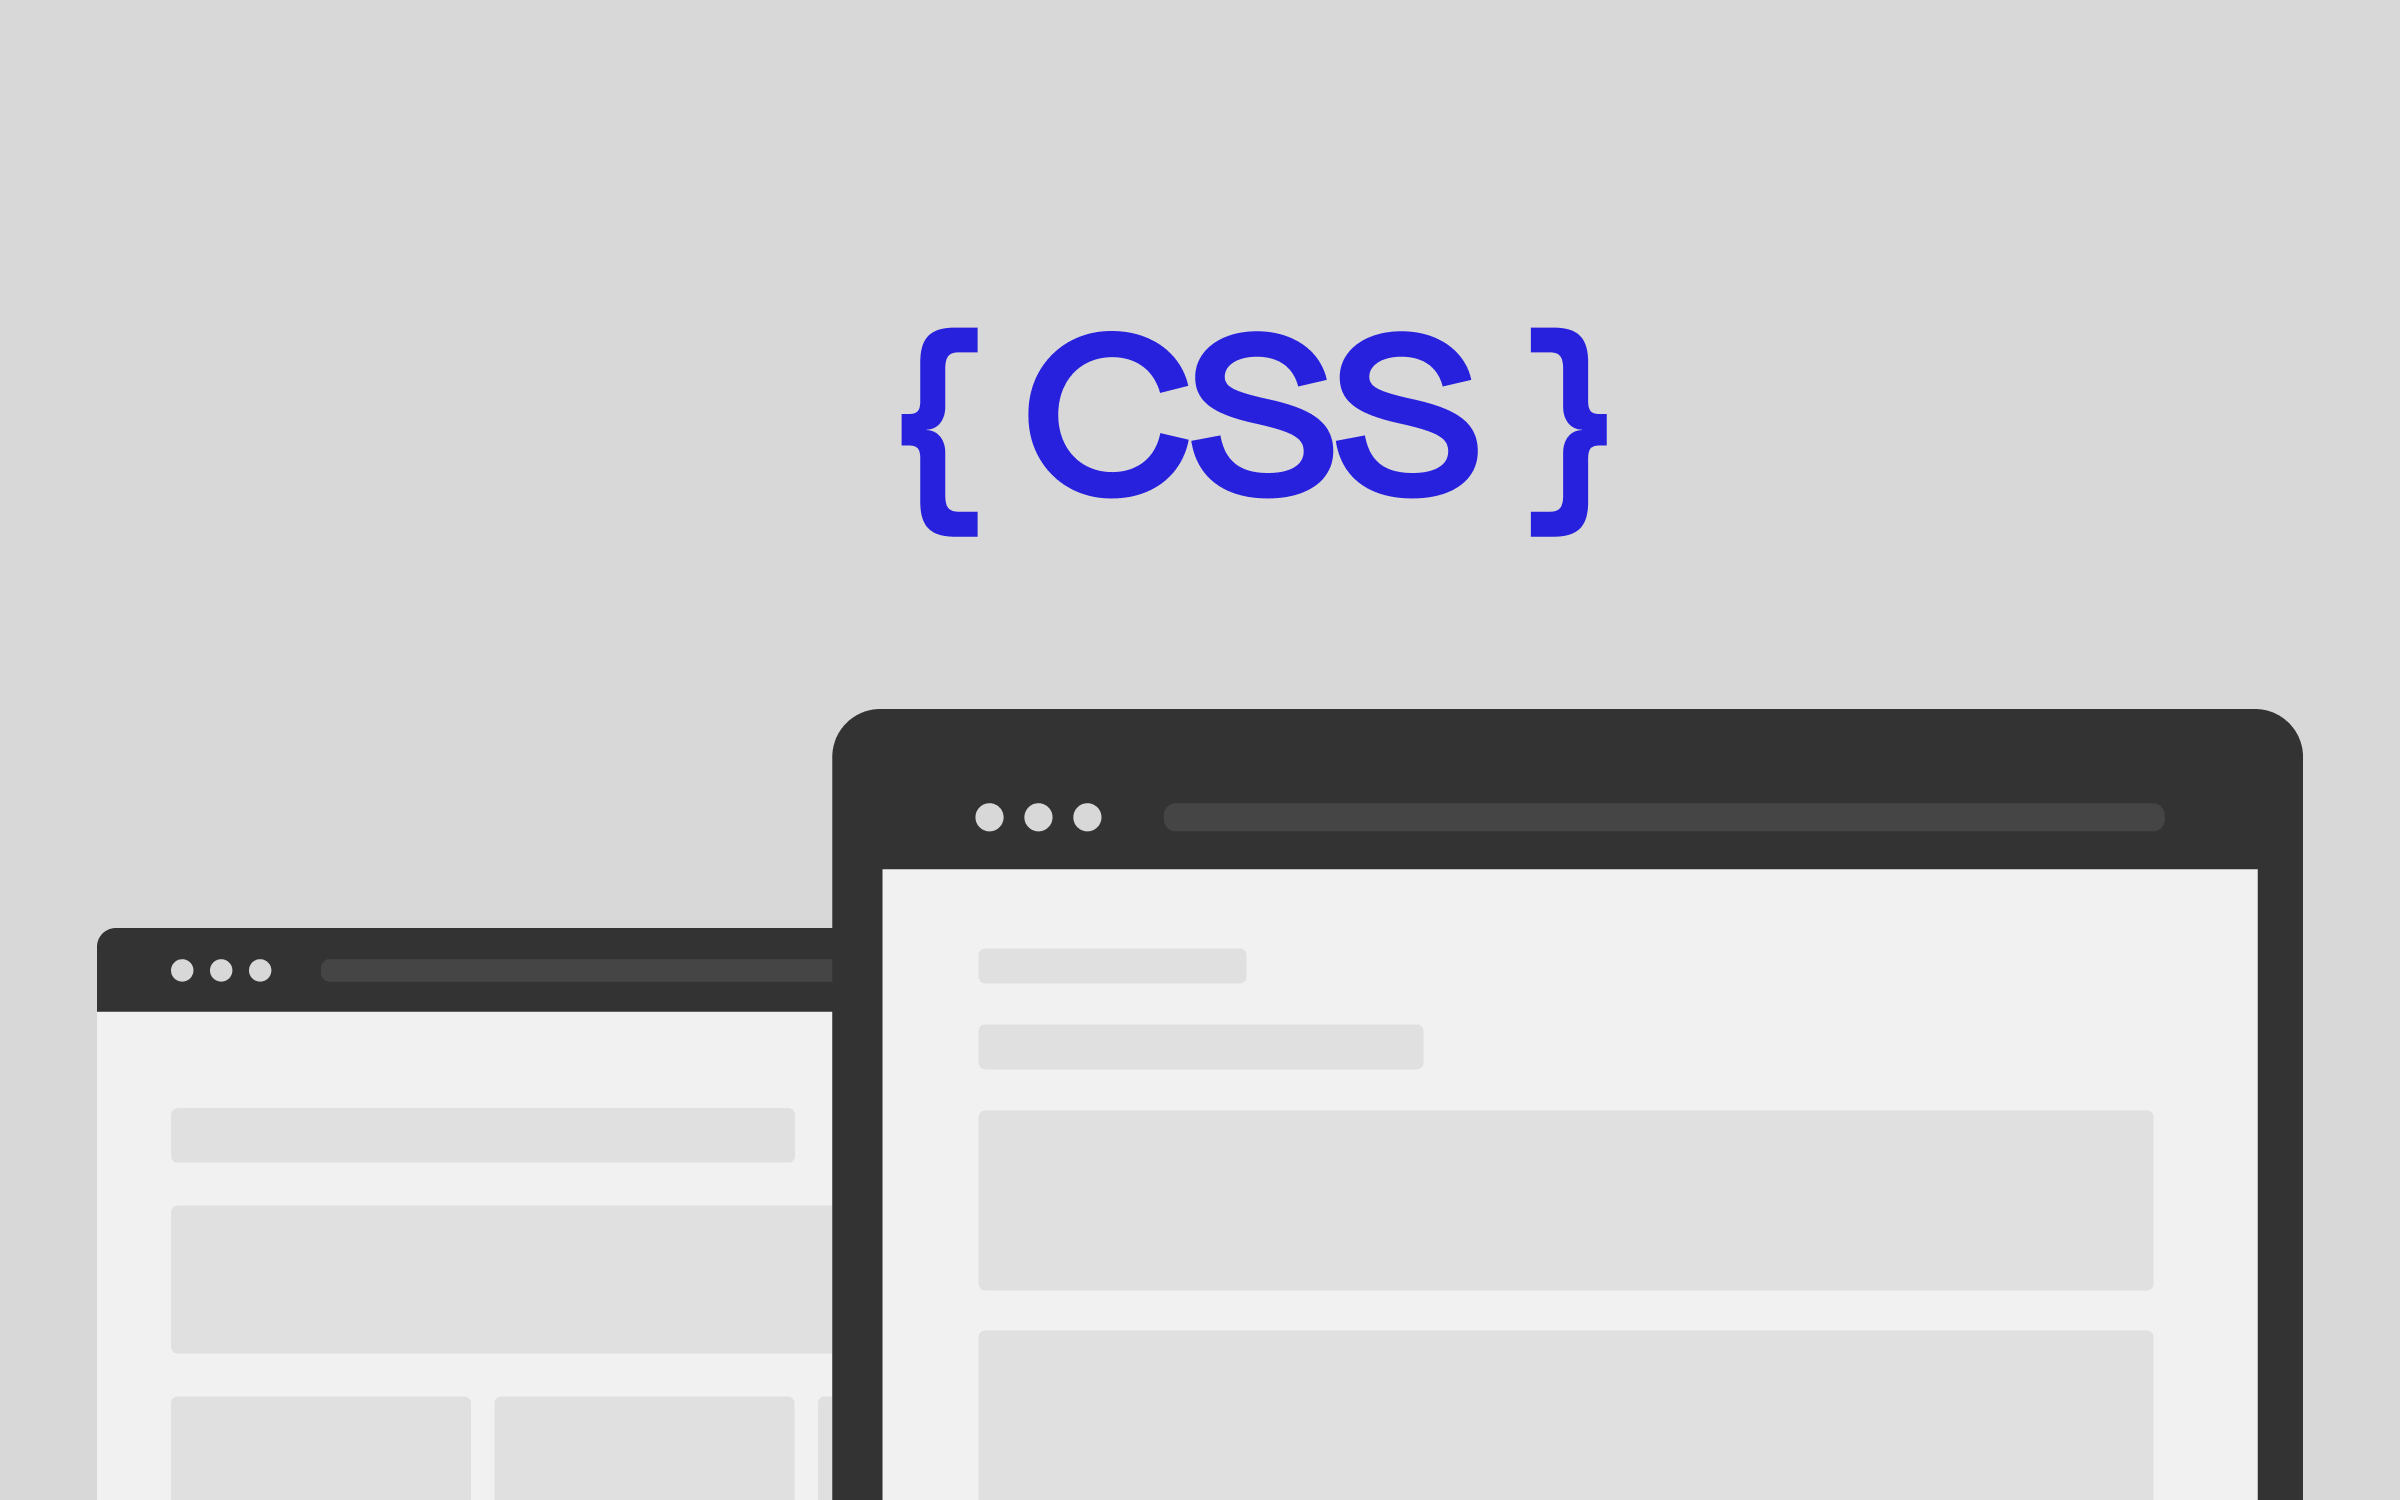 Improve your CSS with these 5 principles